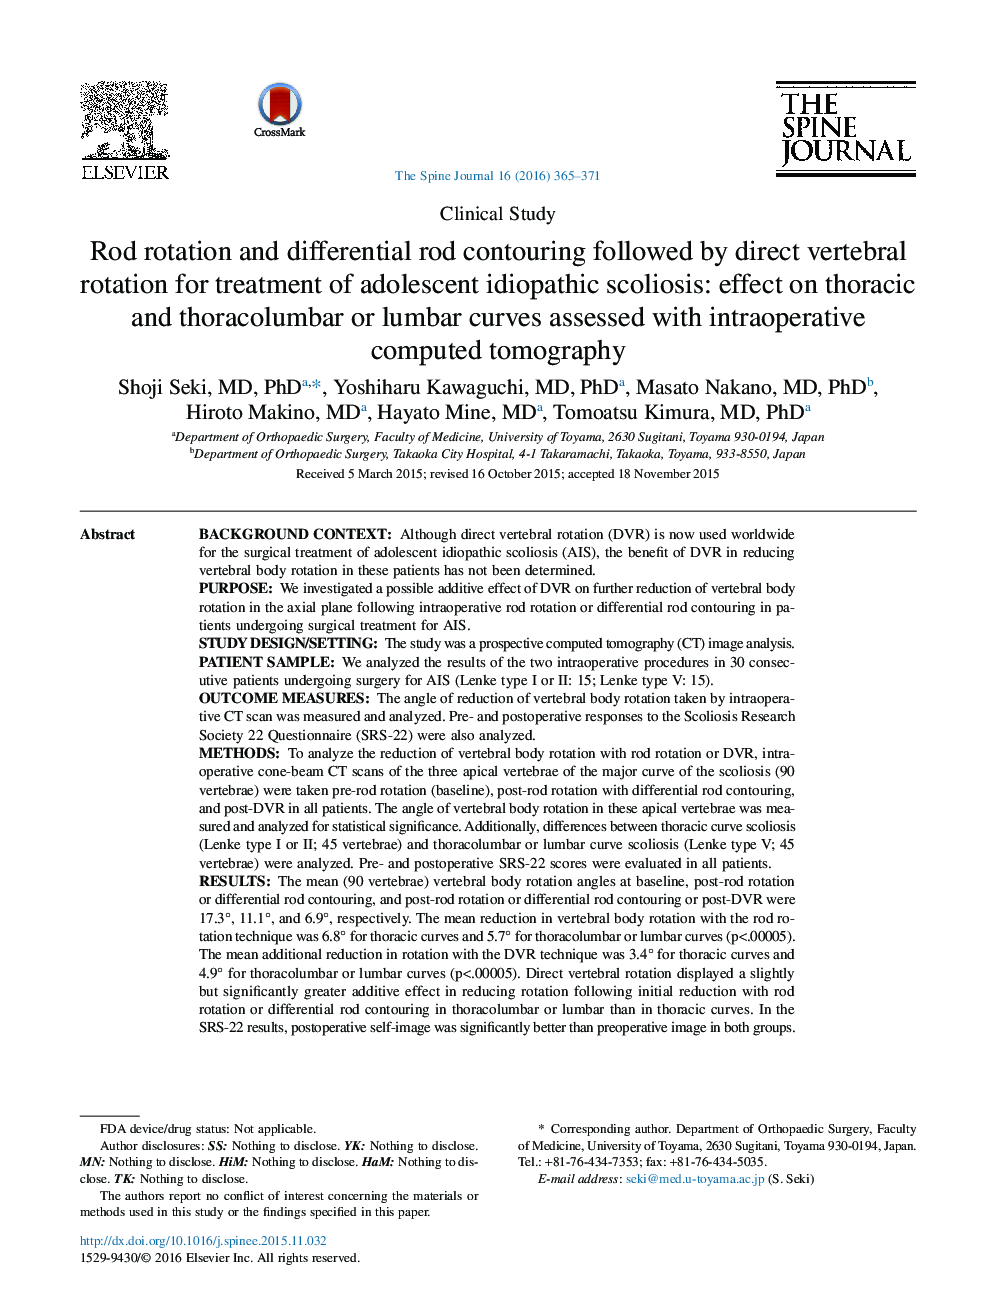 Rod rotation and differential rod contouring followed by direct vertebral rotation for treatment of adolescent idiopathic scoliosis: effect on thoracic and thoracolumbar or lumbar curves assessed with intraoperative computed tomography 